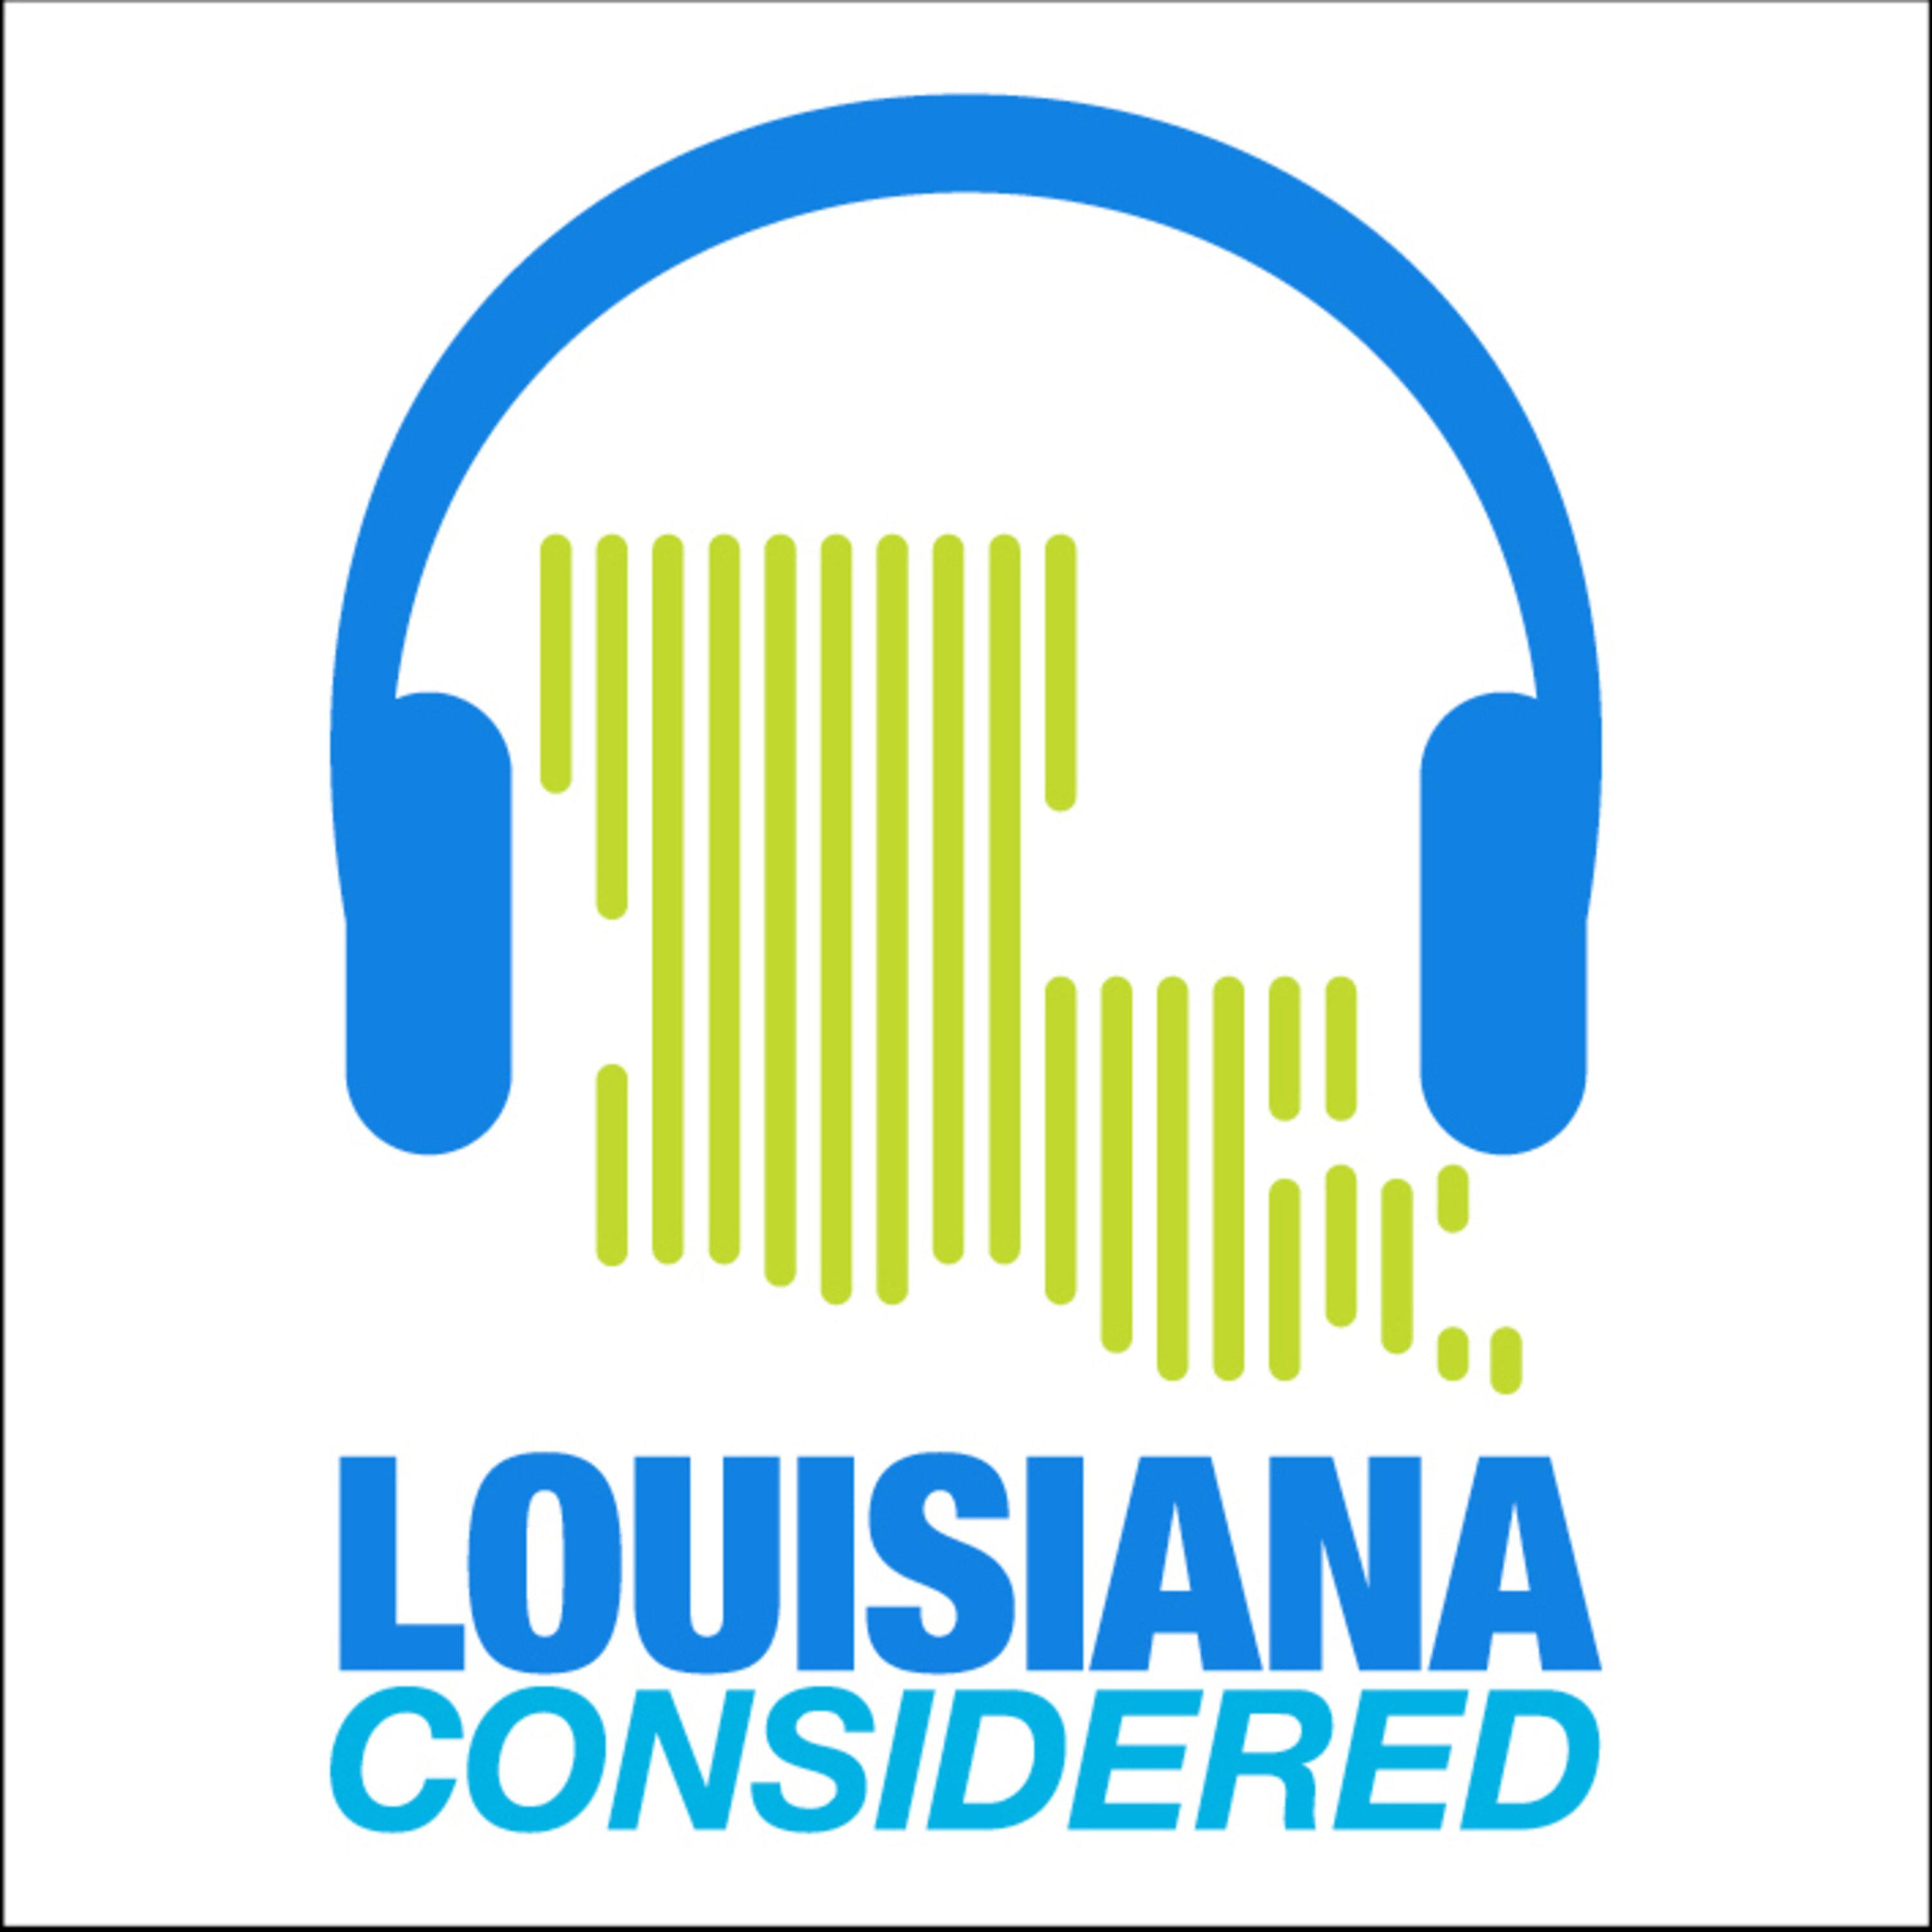 Thumbnail for "Louisiana Considered: FEMA’s Failures To Address Economic Disparities In Disaster Relief, New Orleans Business Alliance Head Takes Similar Position In Michigan".